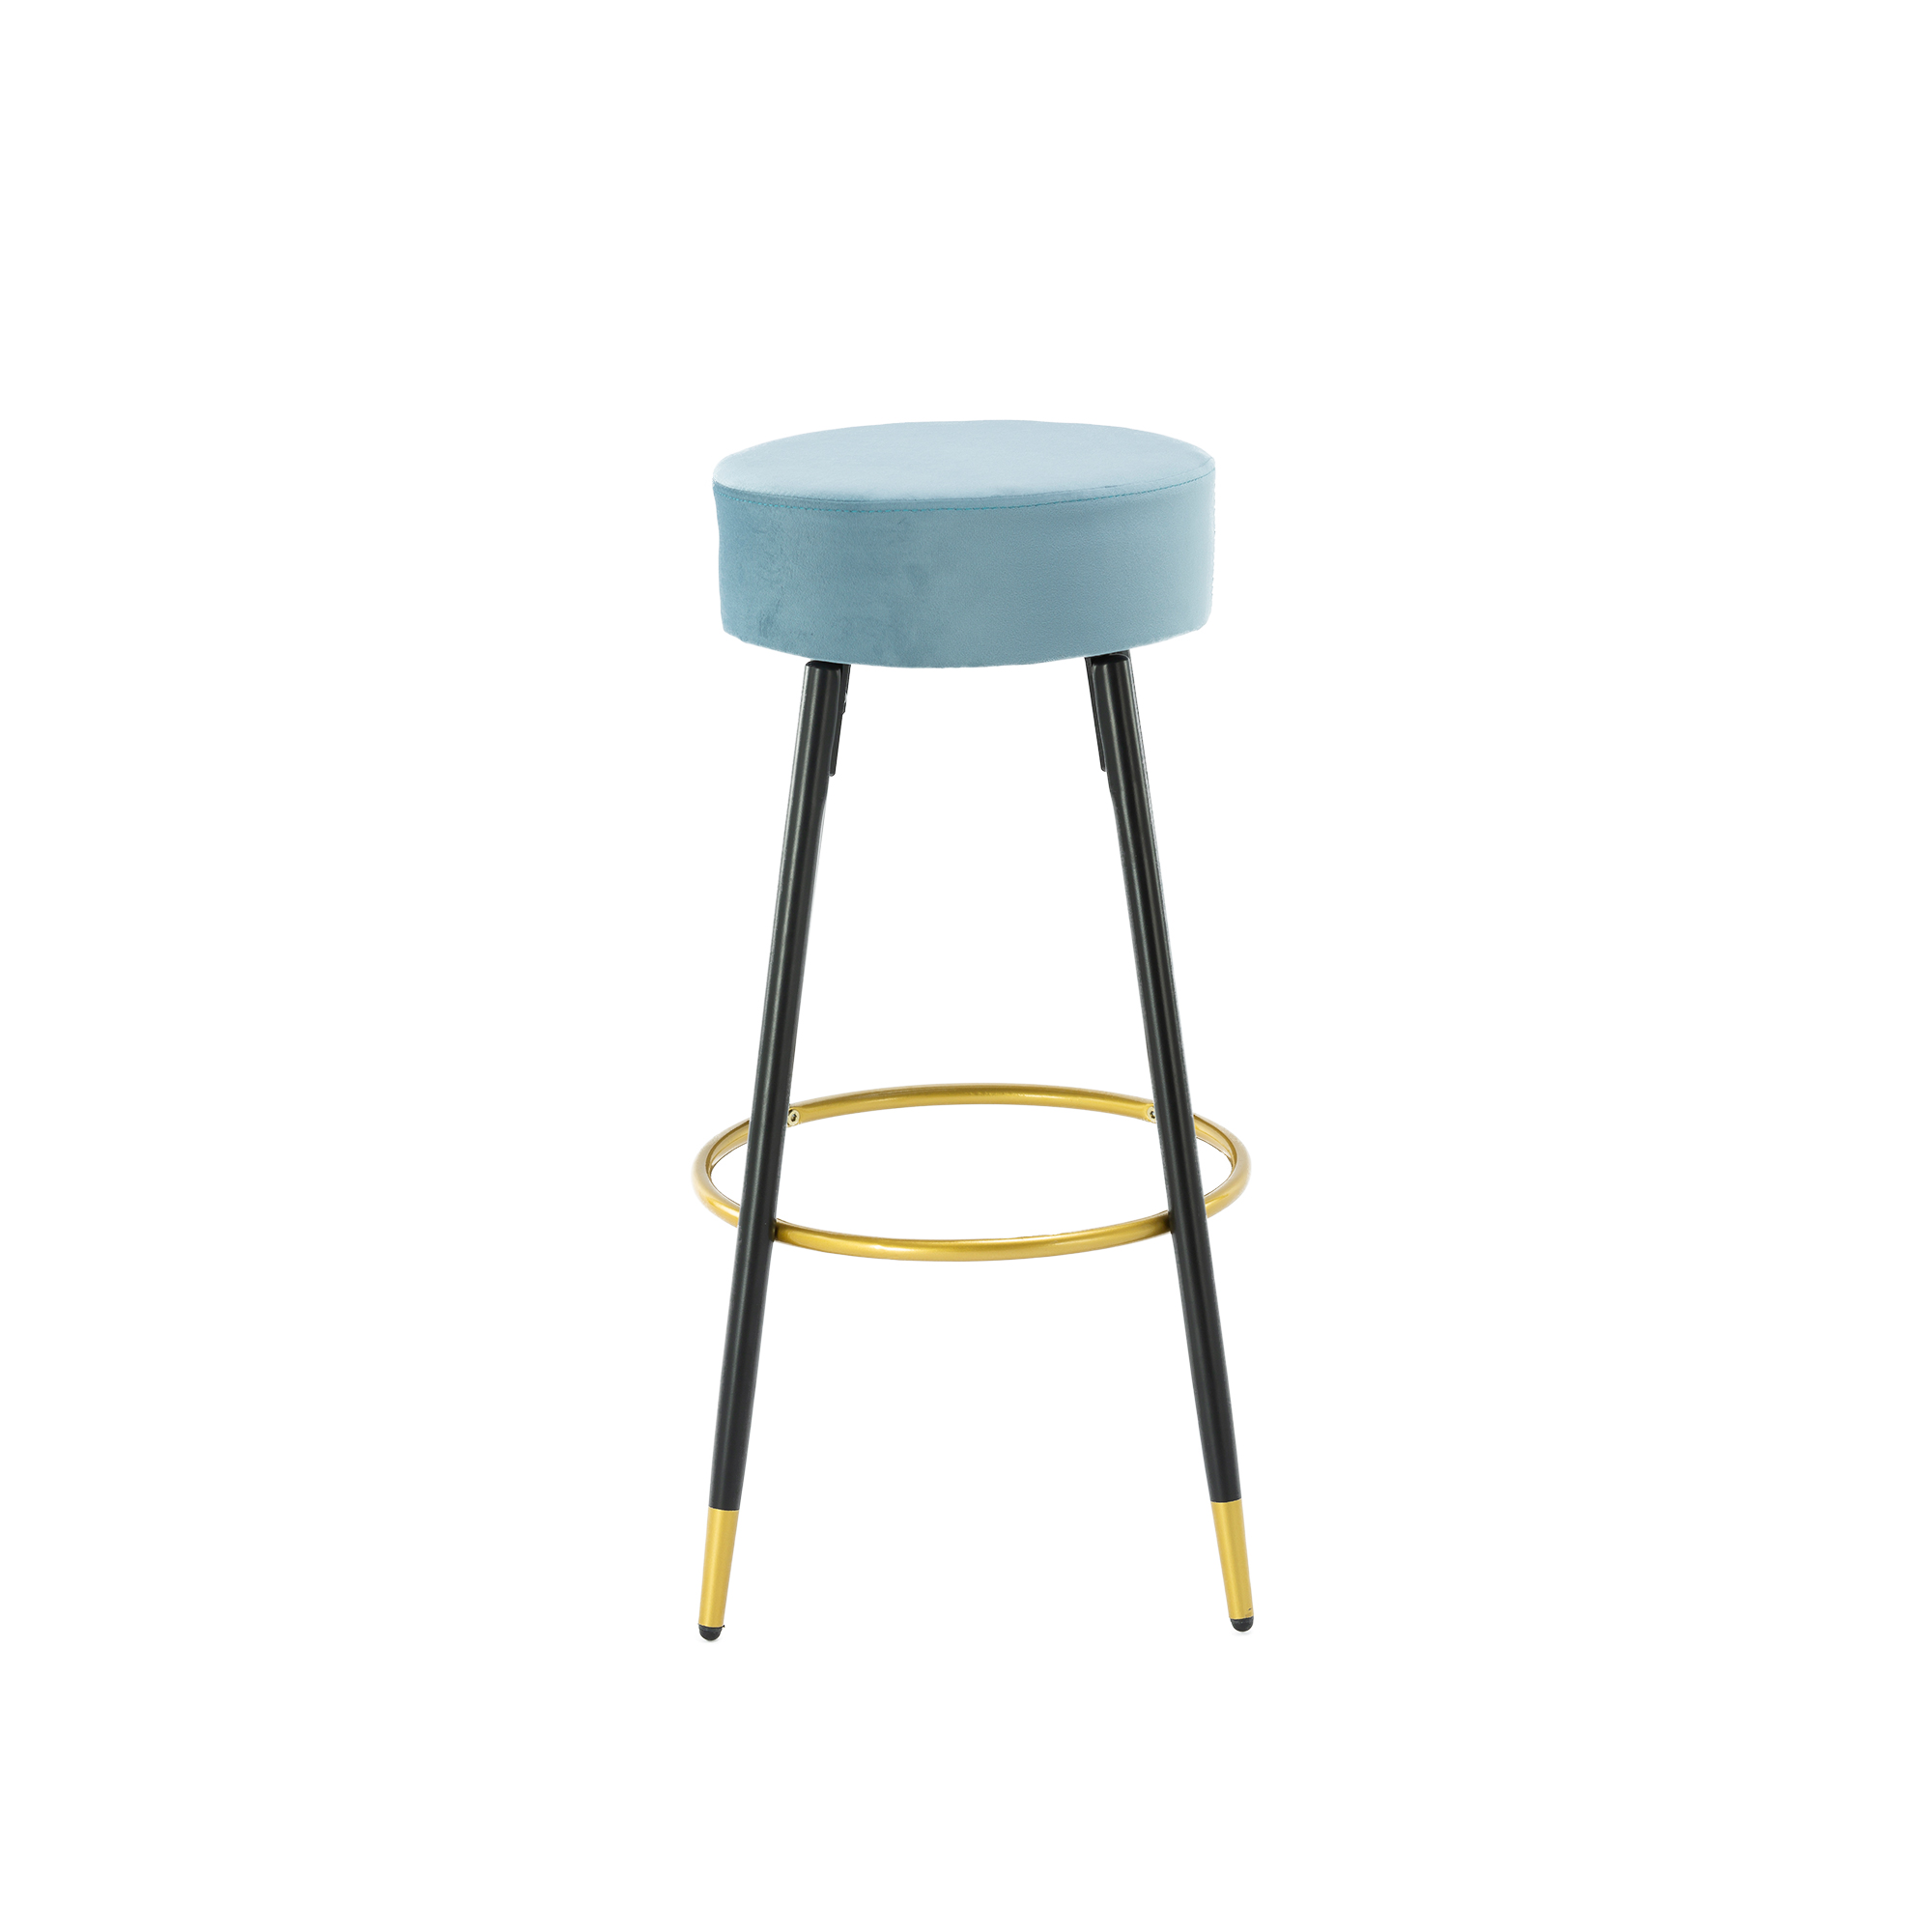 Counter Height Bar Stools Set of 2, Velvet Kitchen Stools Upholstered Dining Chair Stools 24 Inches Height with Golden Footrest for Kitchen Island Coffee Shop Bar Home Balcony,-Boyel Living